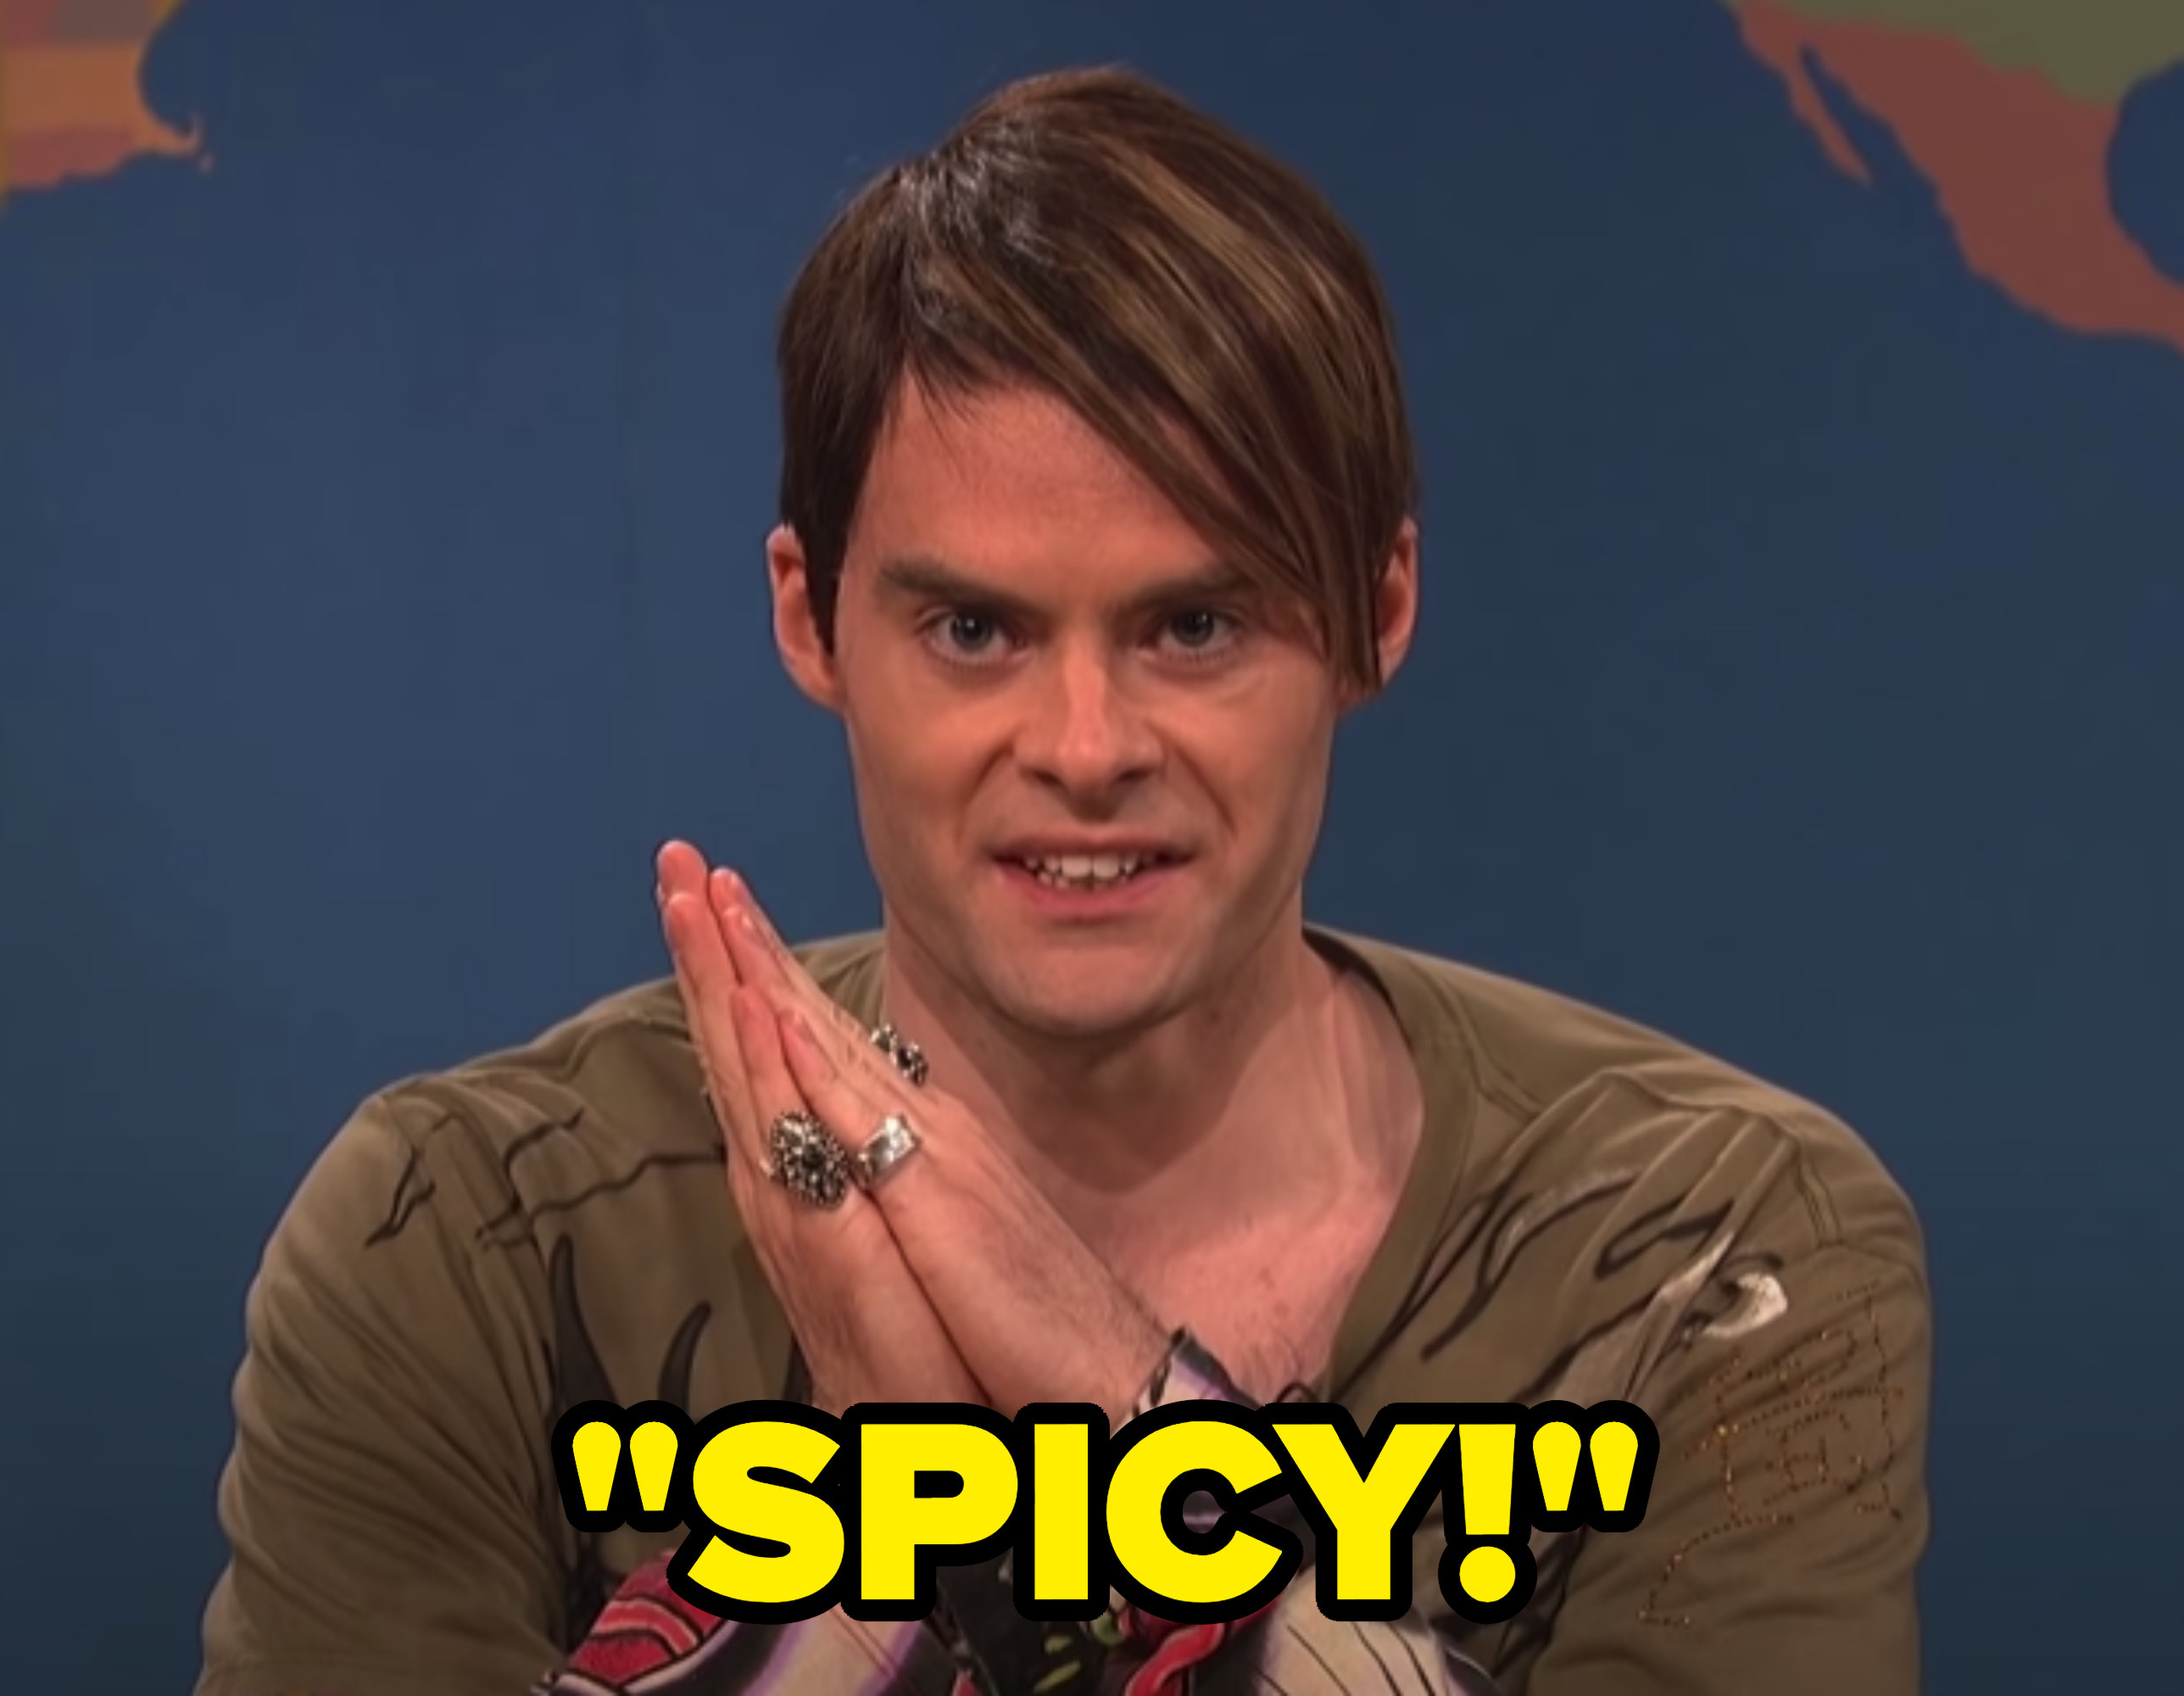 Bill Hader as Stefon on &quot;SNL&quot; saying &quot;Spicy!&quot;